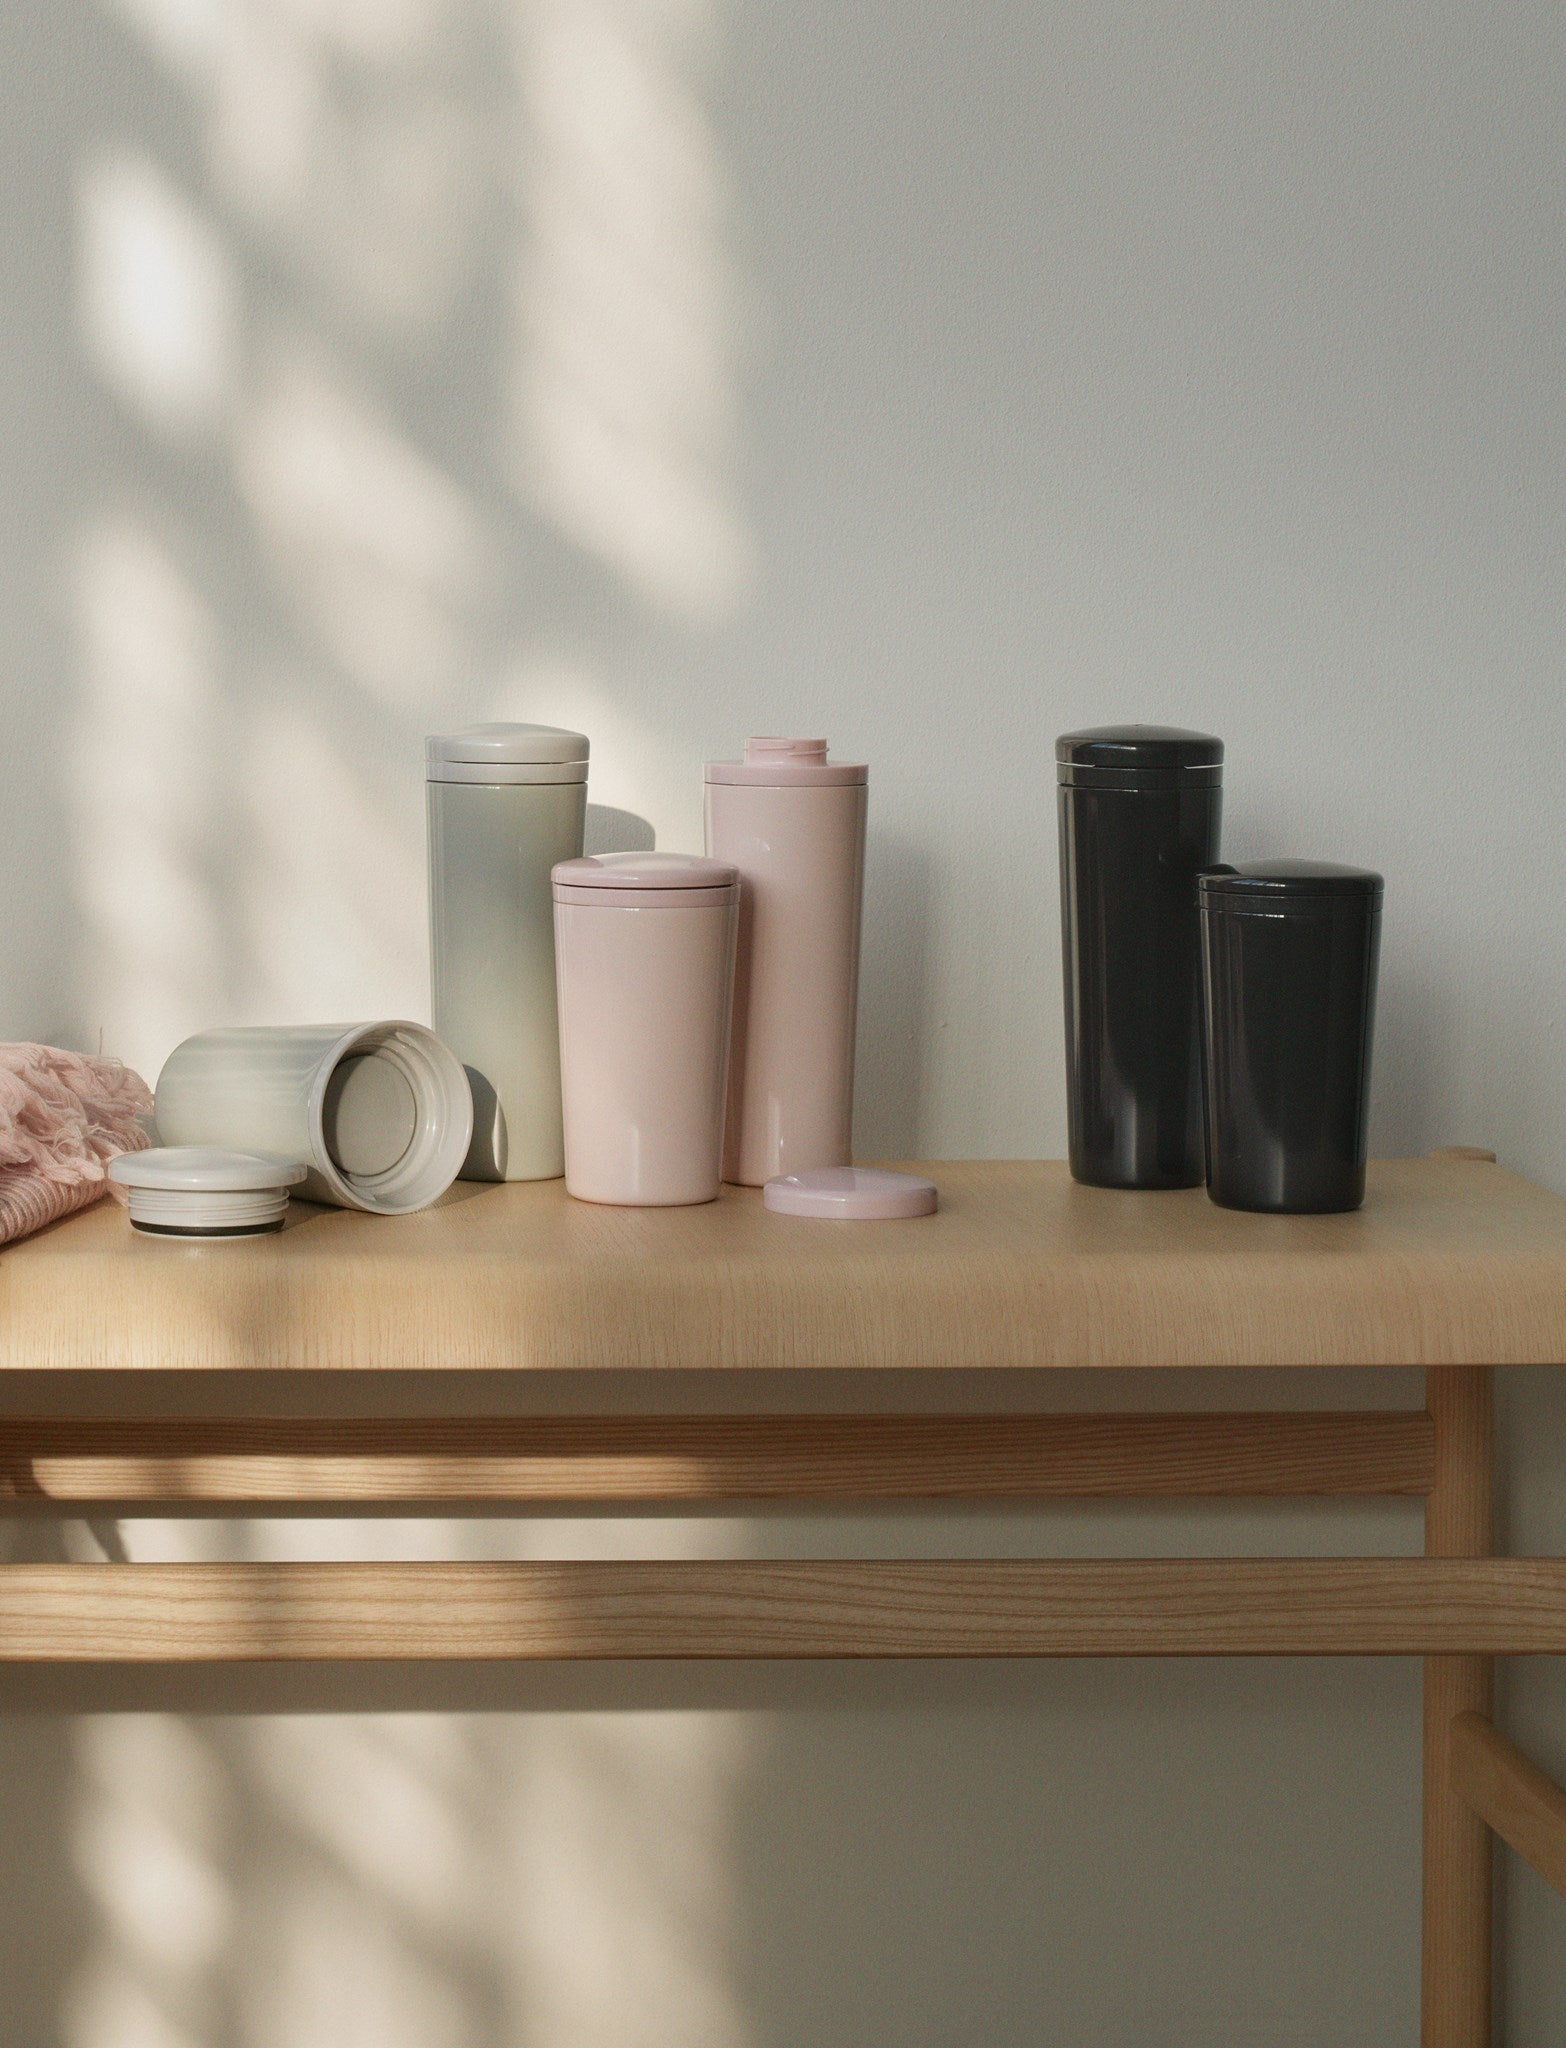 Stelton Carrie Thermos瓶0,5 L，浅灰色